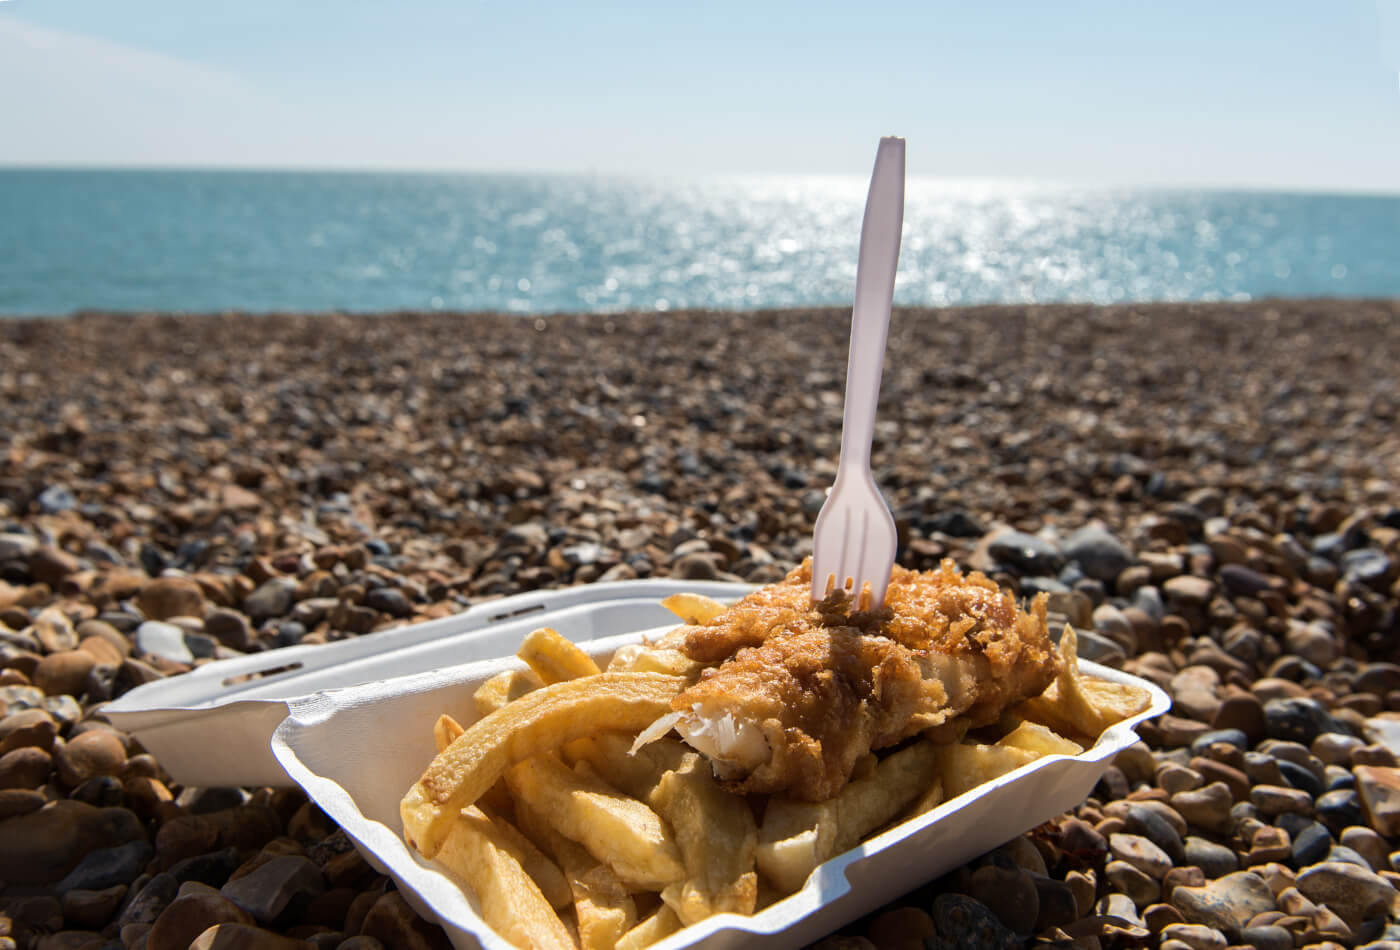 A takeaway portion of fish and chips sat on a rocky beach